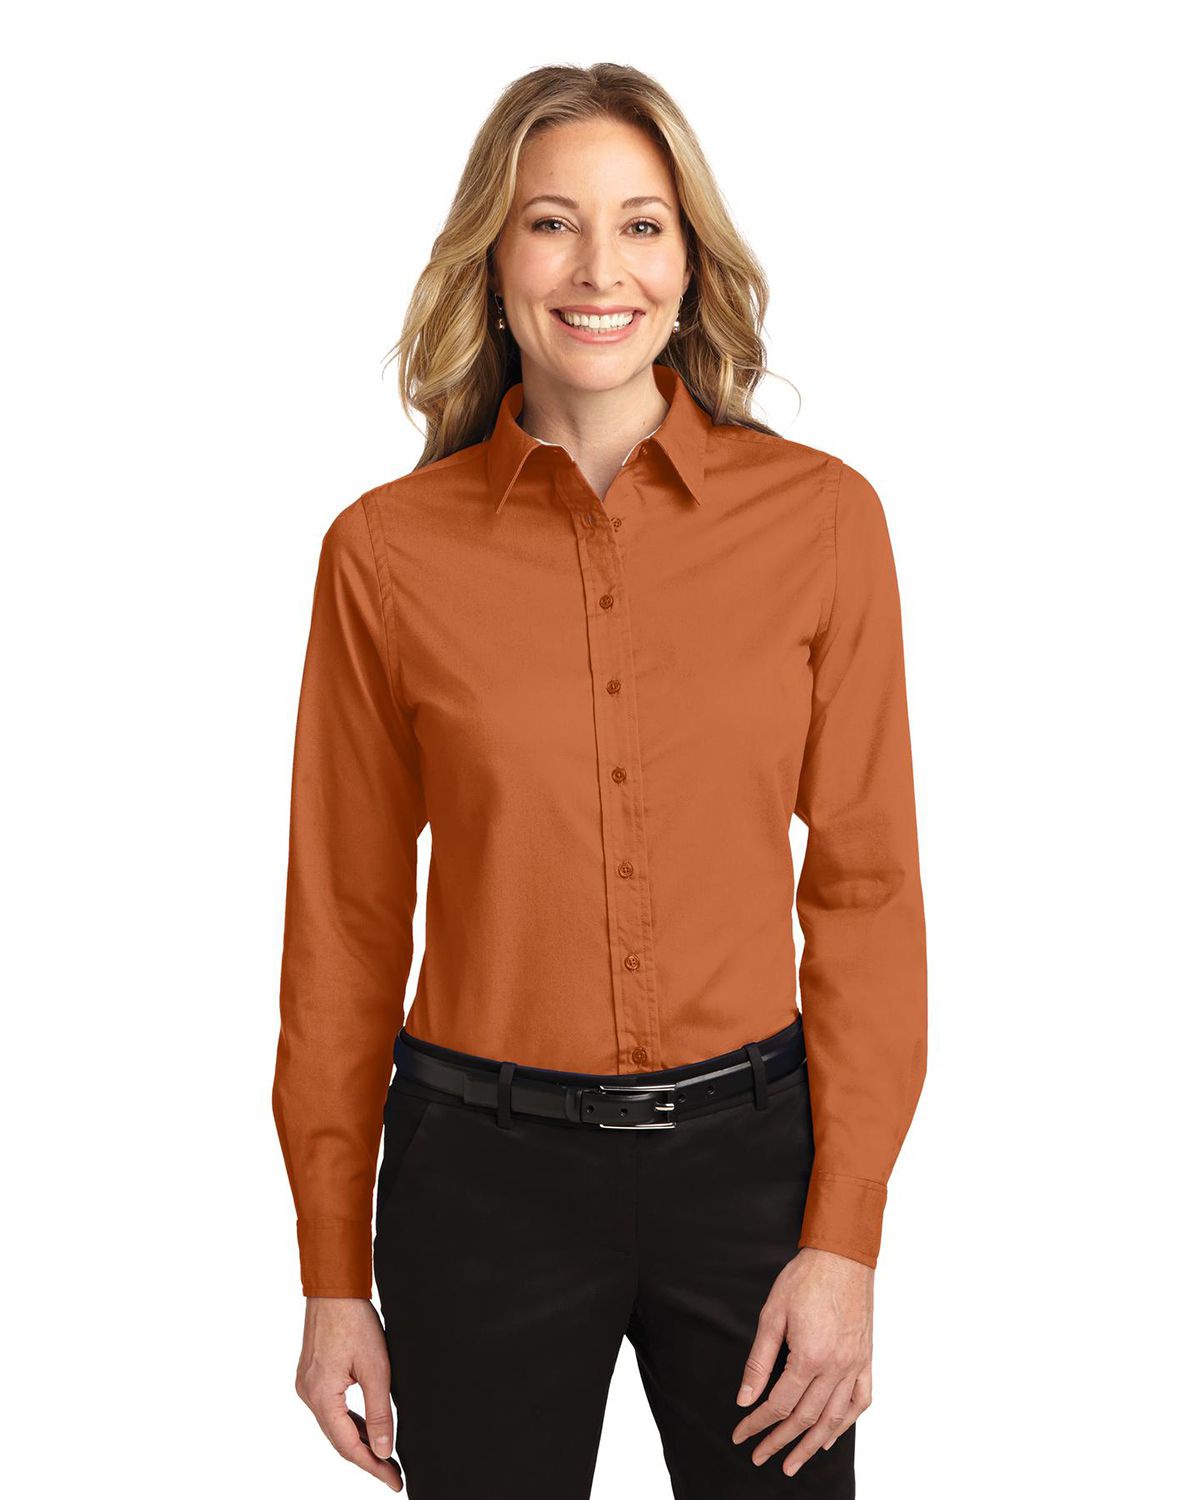 'Port Authority L608 Ladies Long Sleeve Easy Care Shirt'